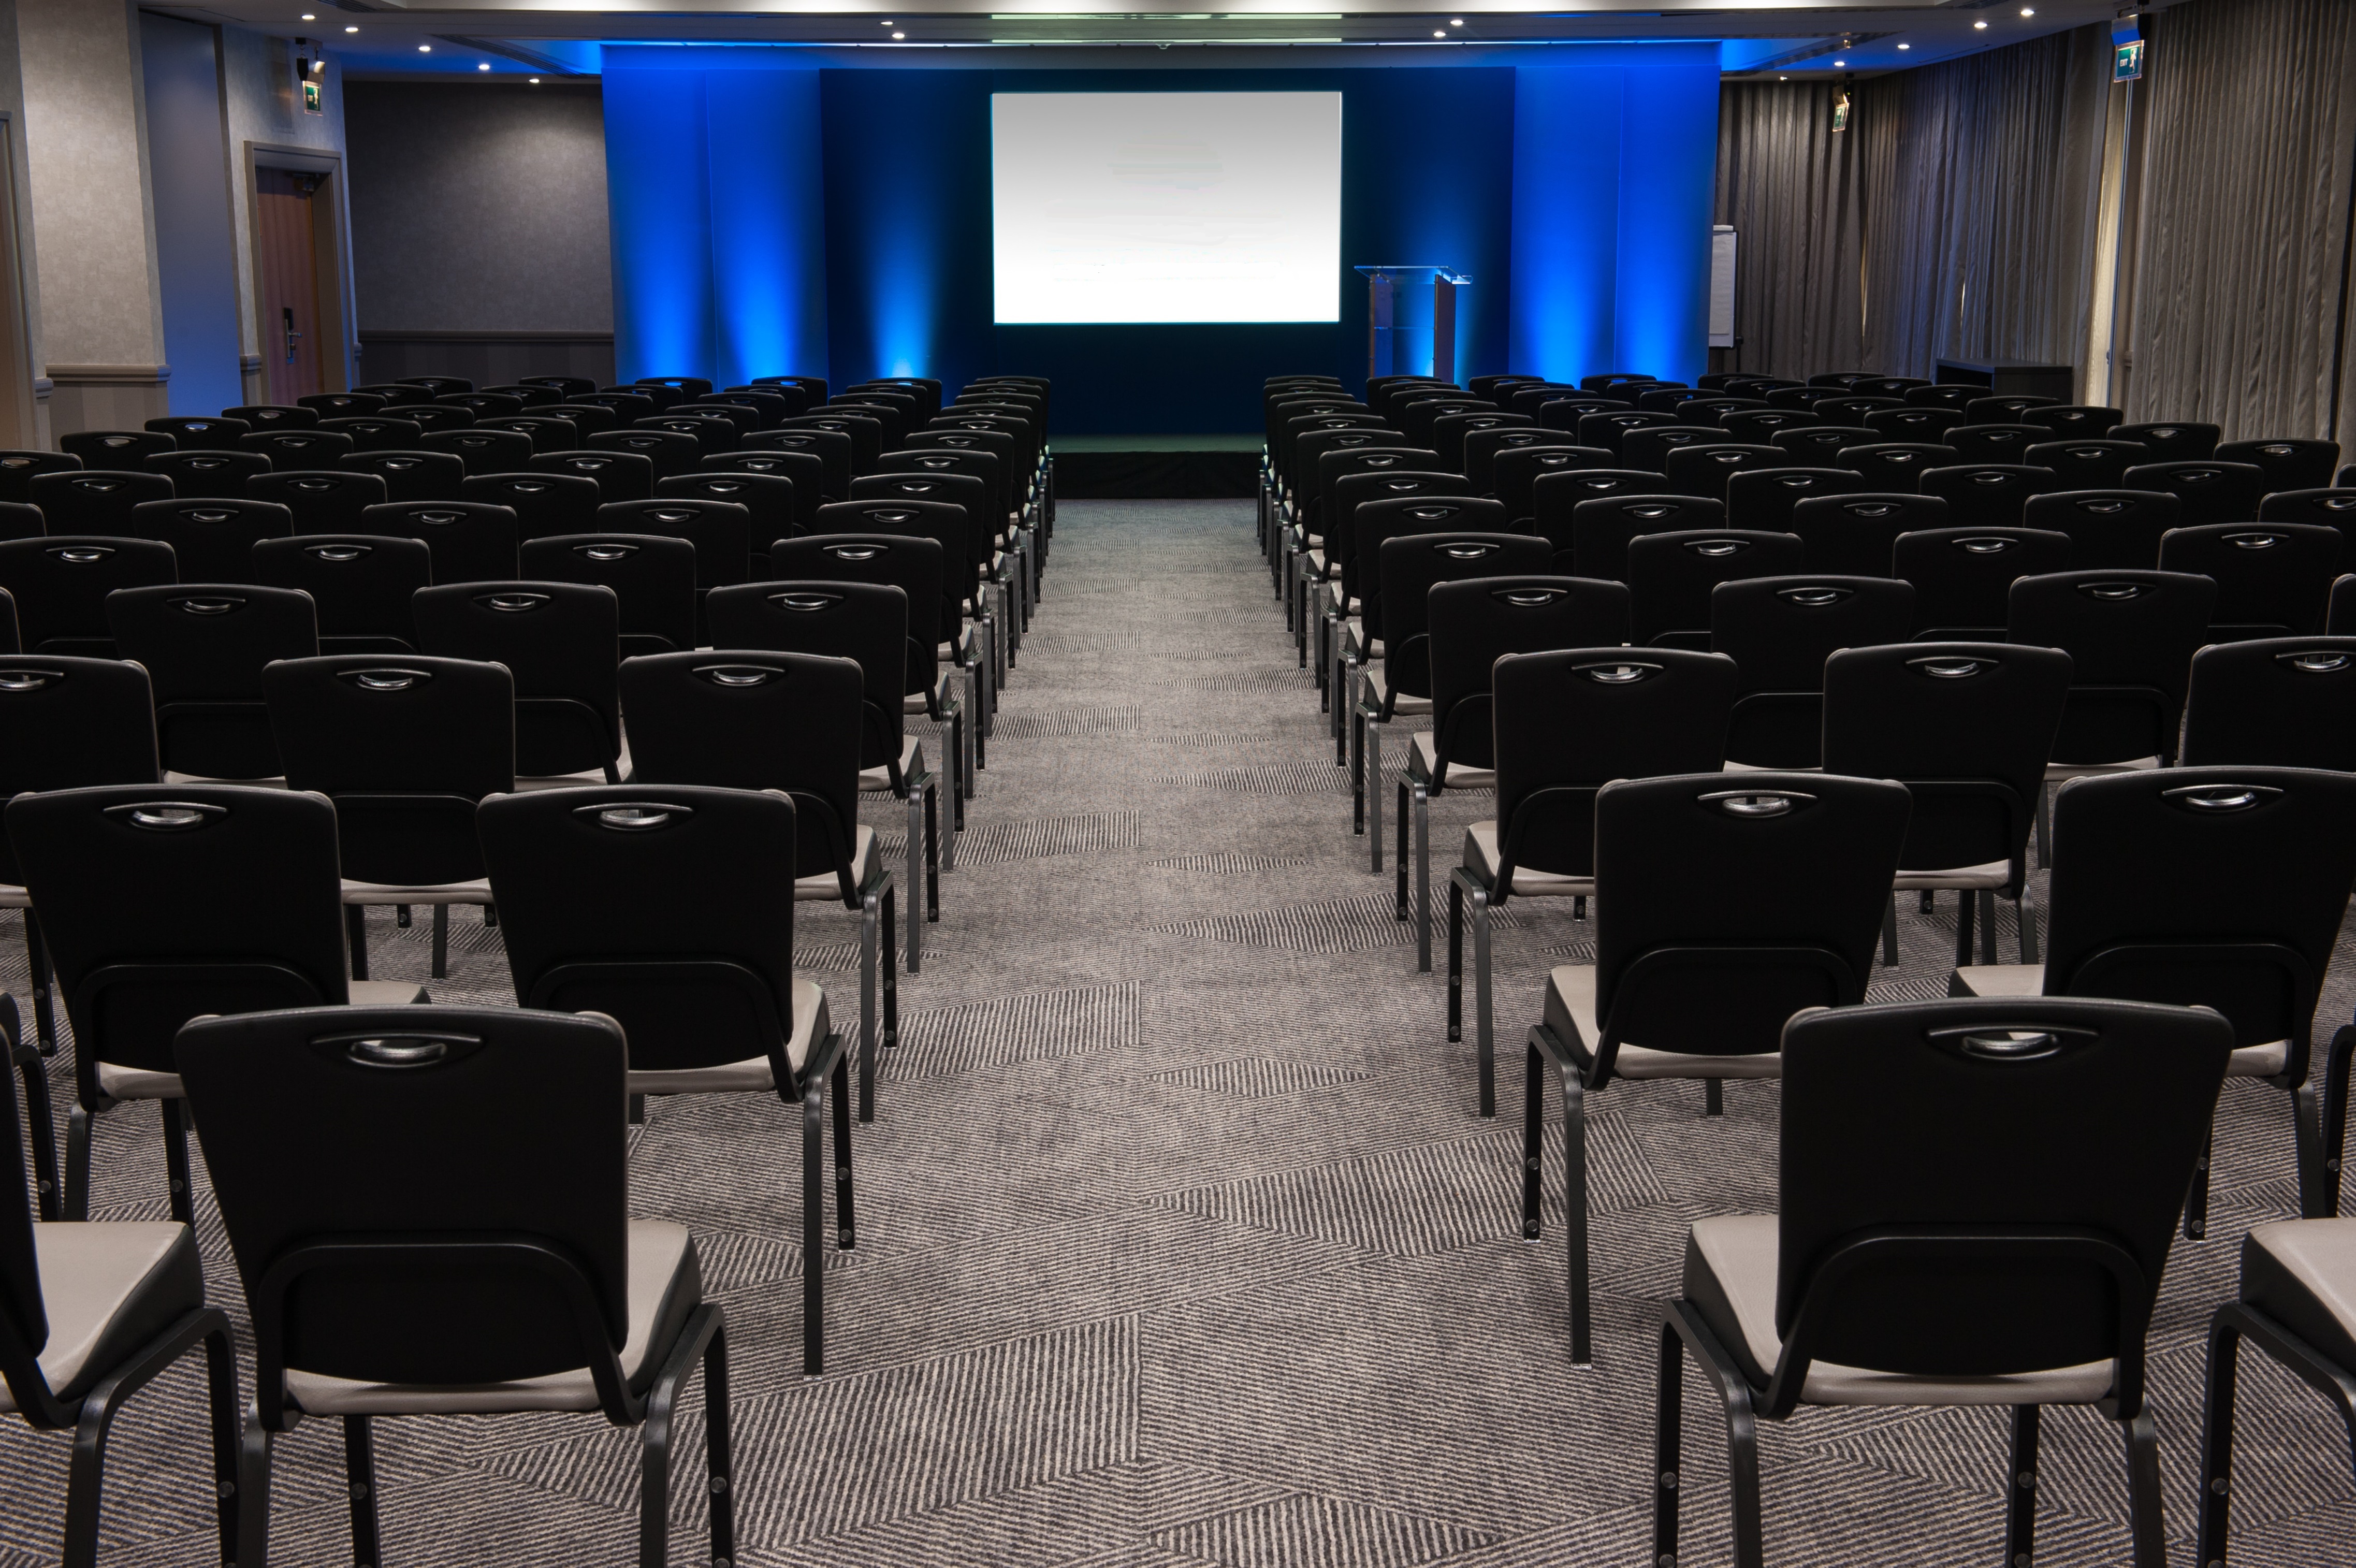 Edinburgh Suite Arranged Theater Style With Rows of Black Chairs Facing Dramatically Lit Projector Screen and Podium